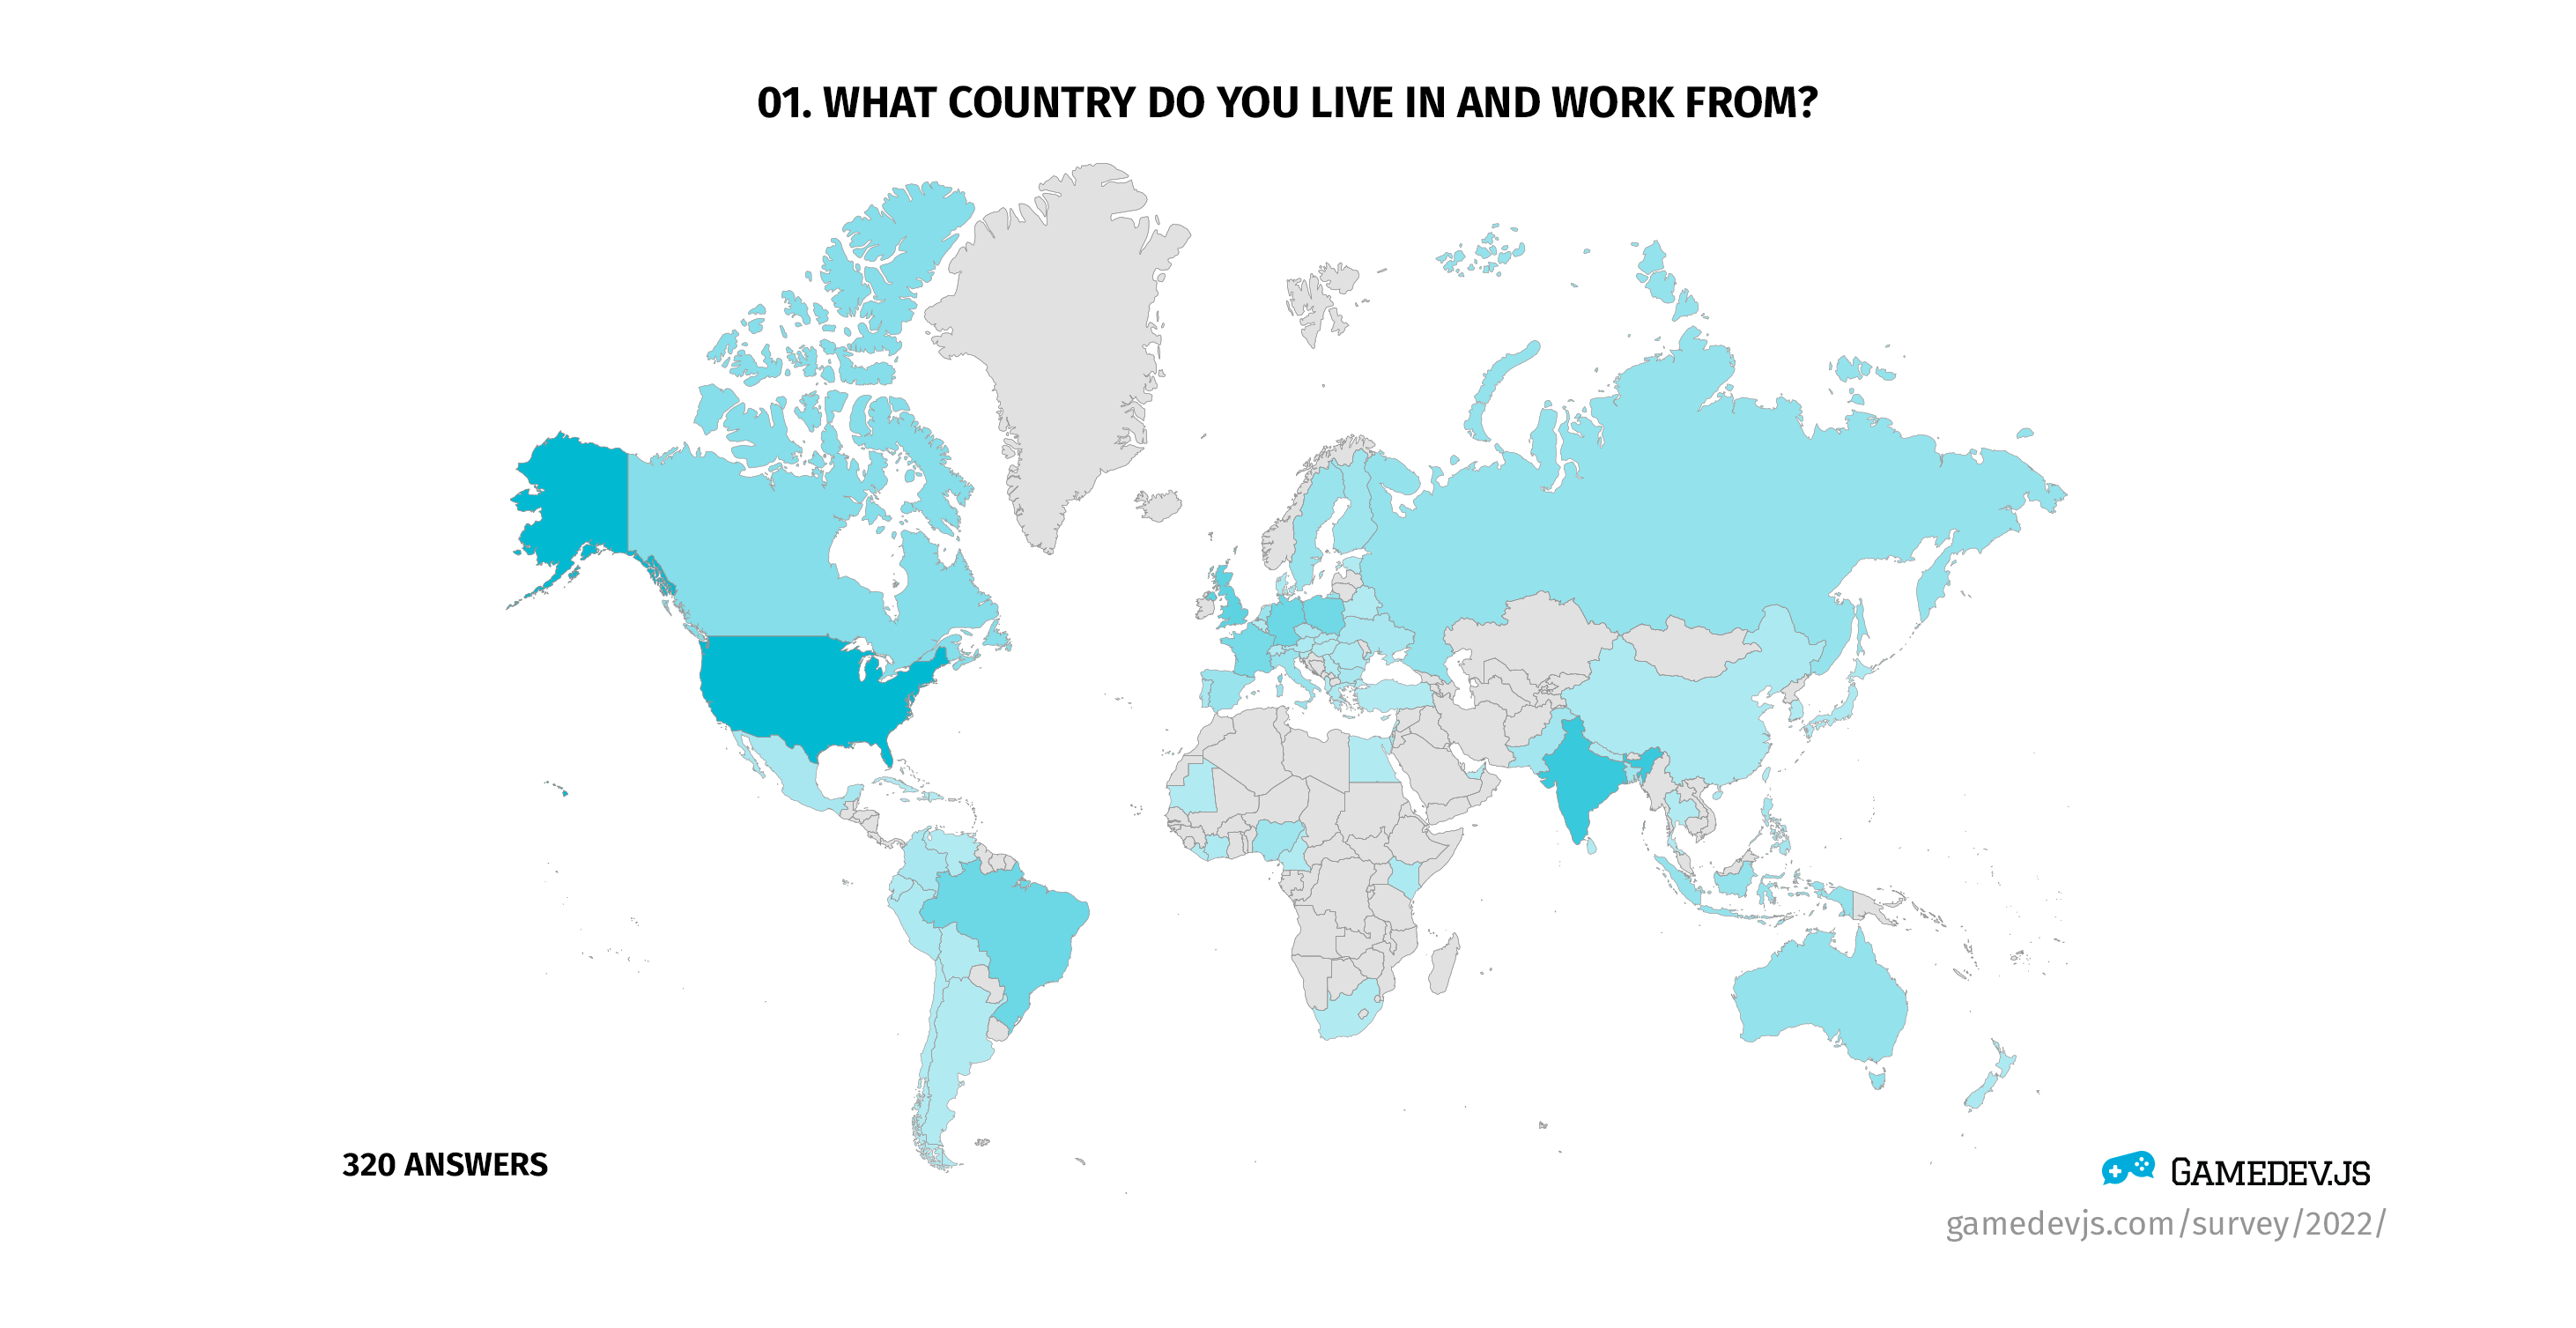 Gamedev.js Survey 2022 - Question #1: What country do you live in and work from?